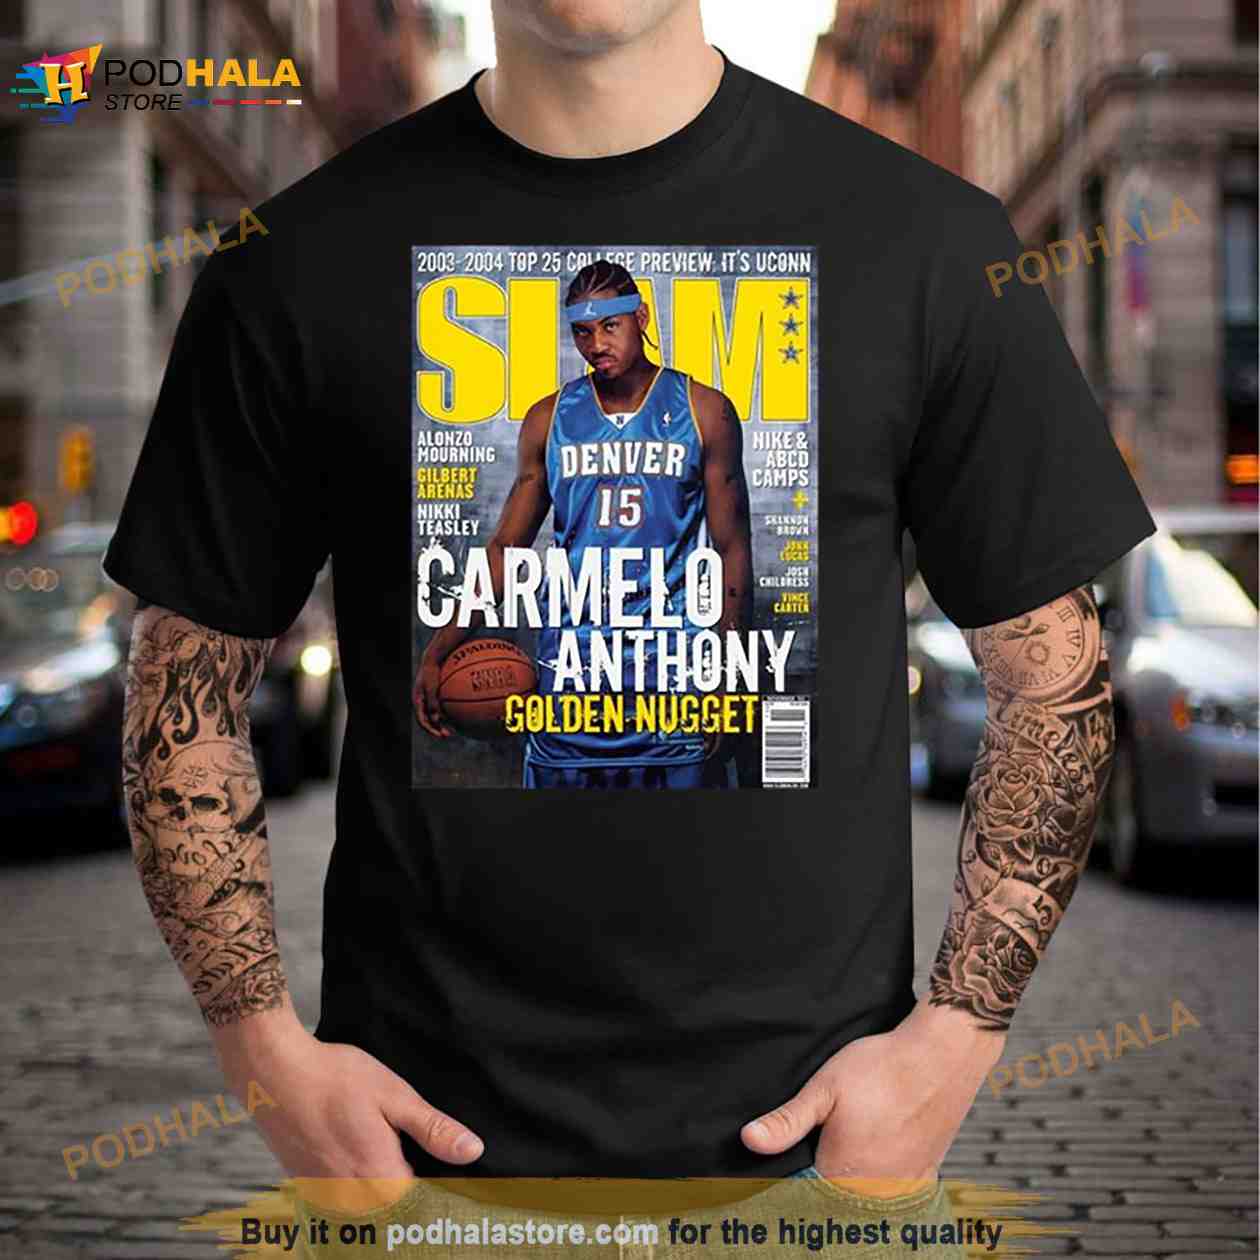 Golden Nugget Carmelo Anthony Shirt